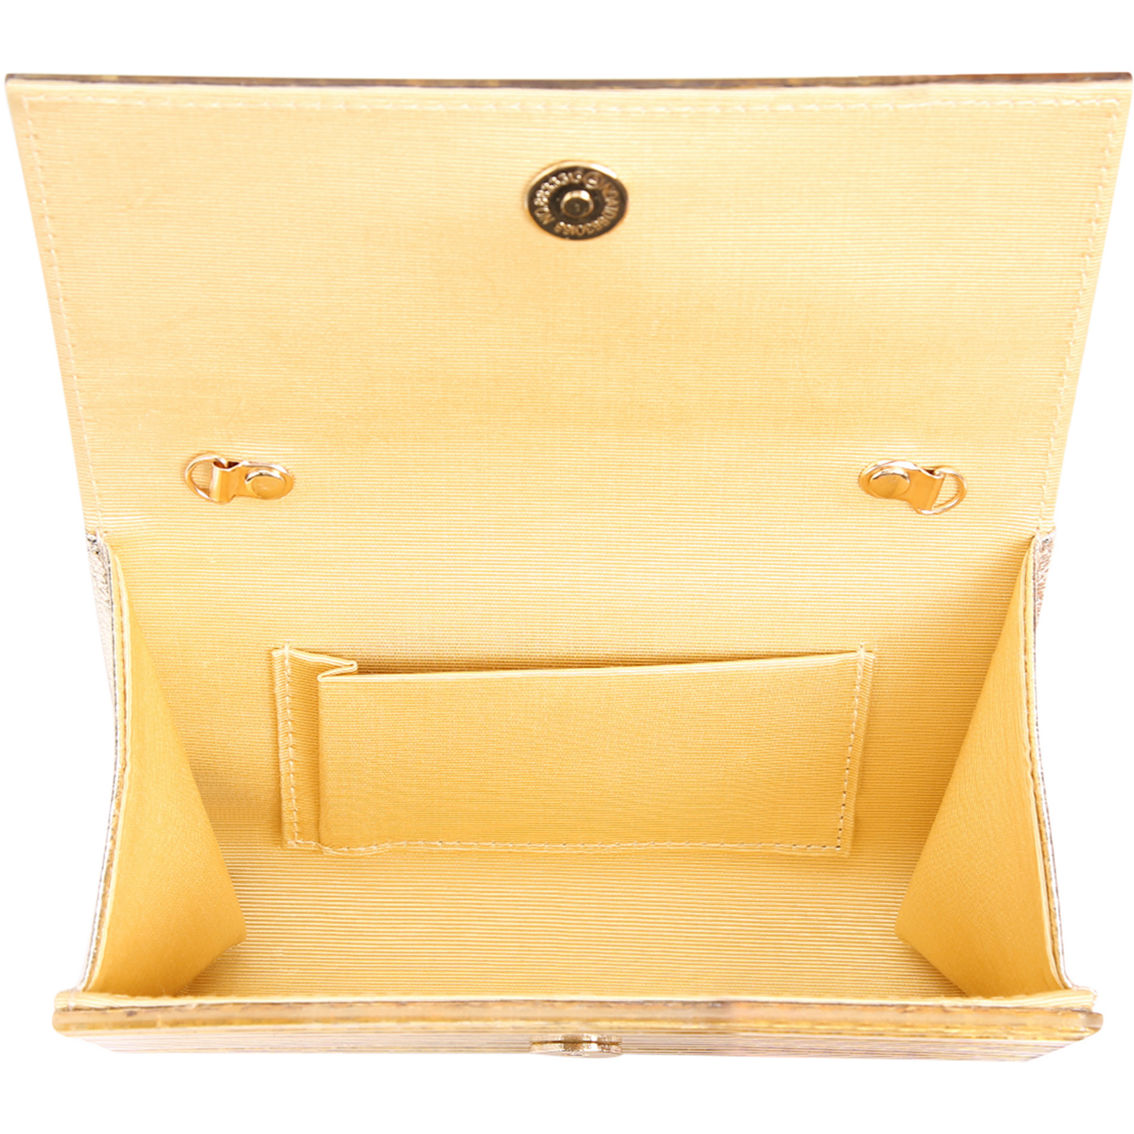 Kurt Geiger Party Eagle Clutch Drench Gold - Image 4 of 6